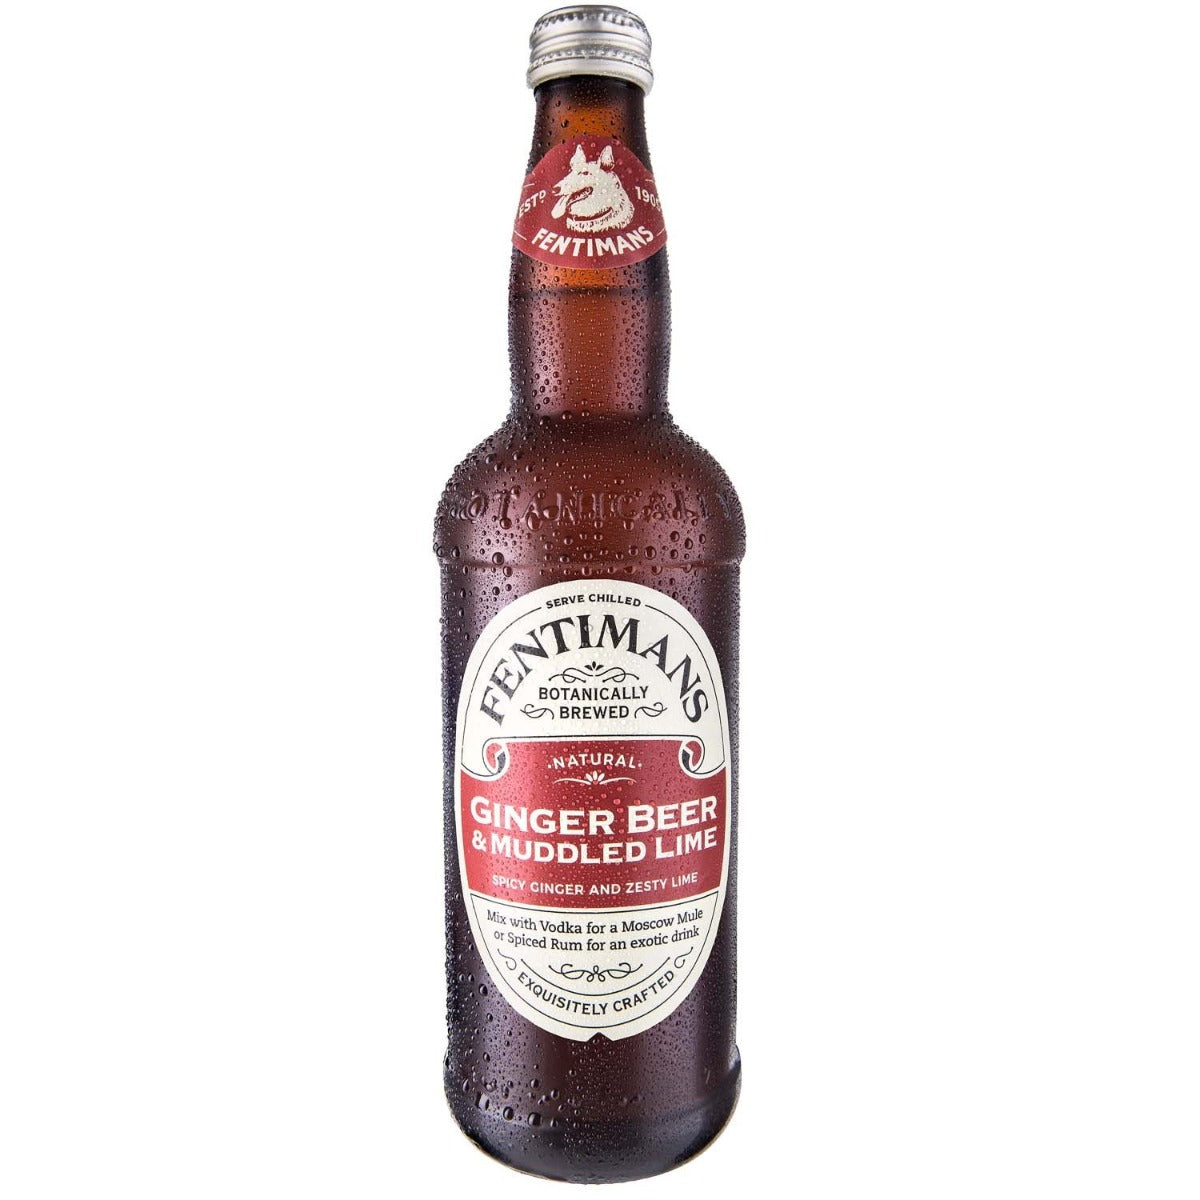 FENTIMANS: Ginger Beer and Muddled Lime, 16.9 fo - Vending Business Solutions